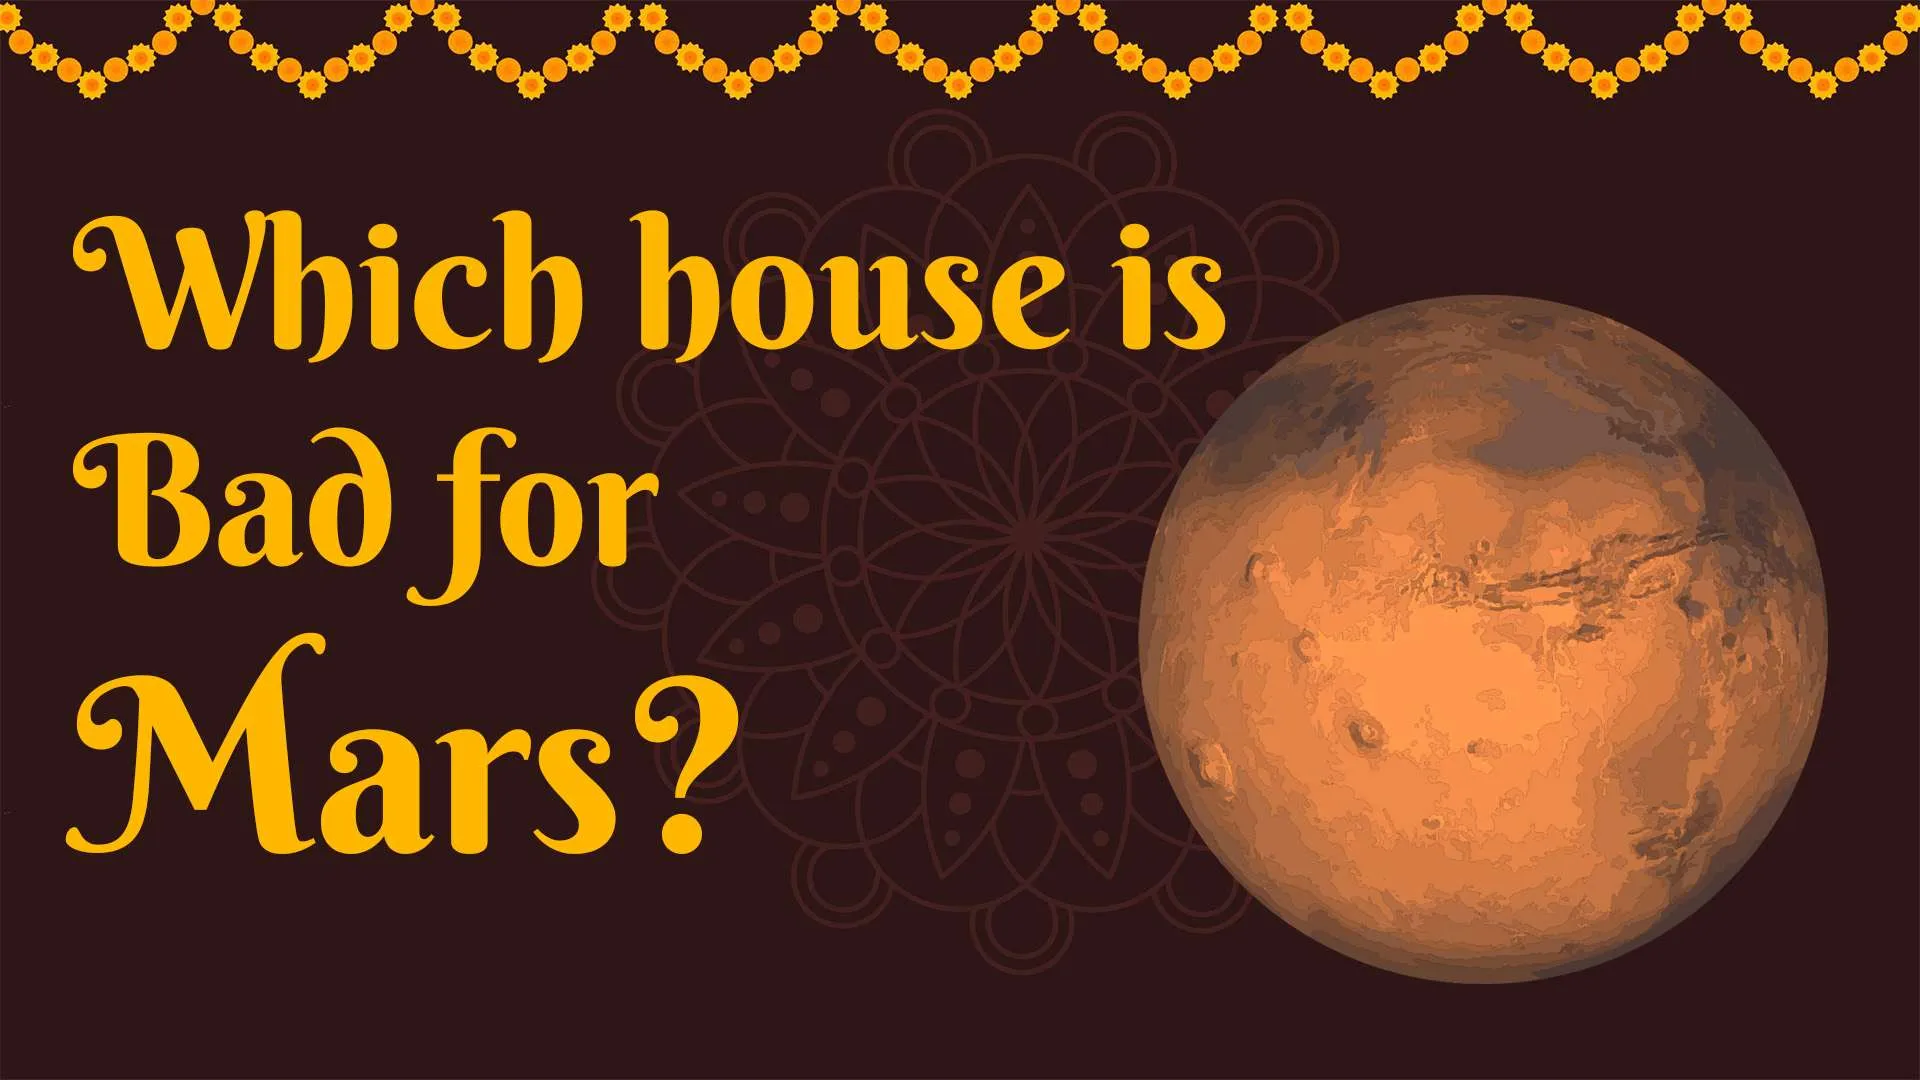 Which houses are bad for Mars?